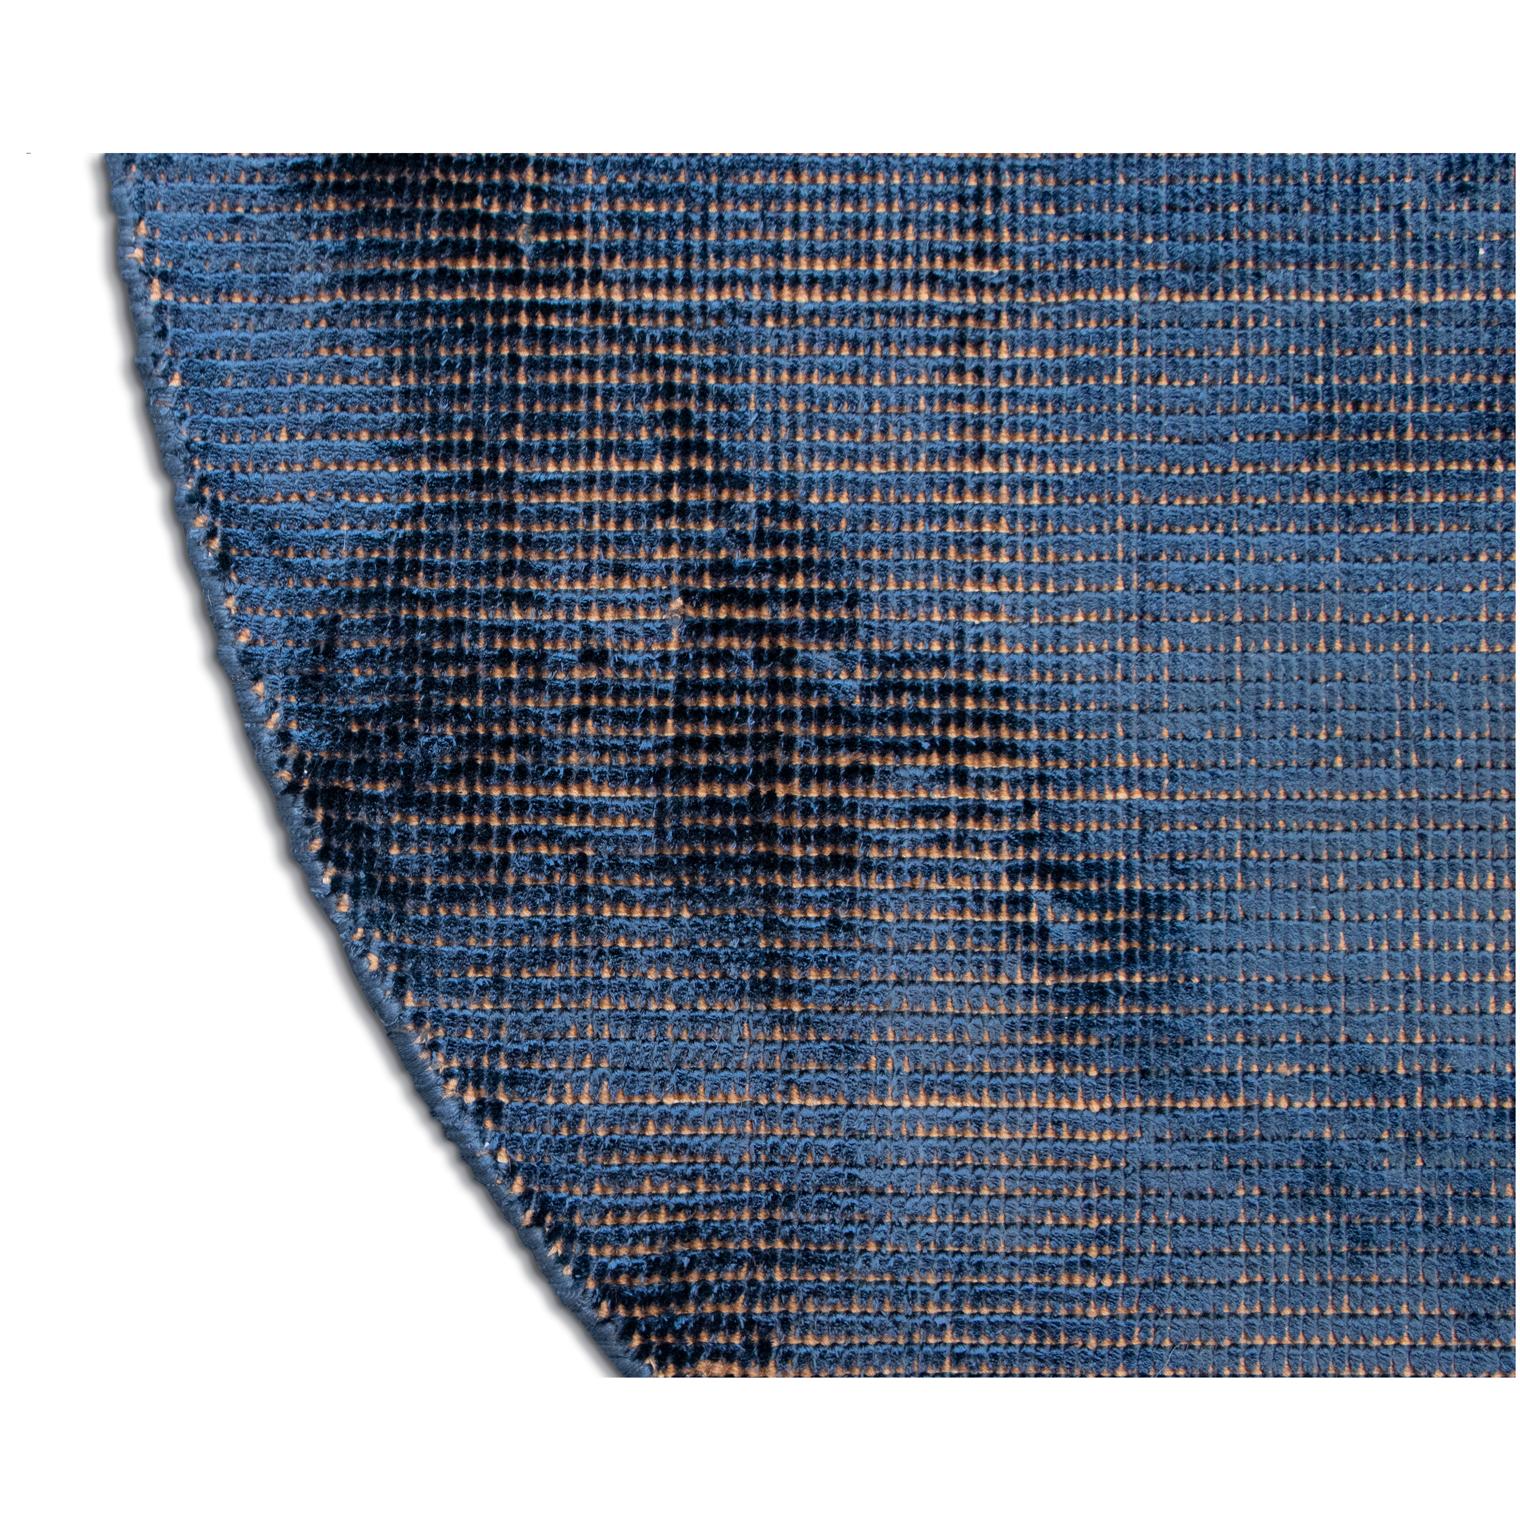 Indian Contemporary Natural Shiny Blue Pure Silk Rug by Deanna Comelllini 180x190 cm For Sale